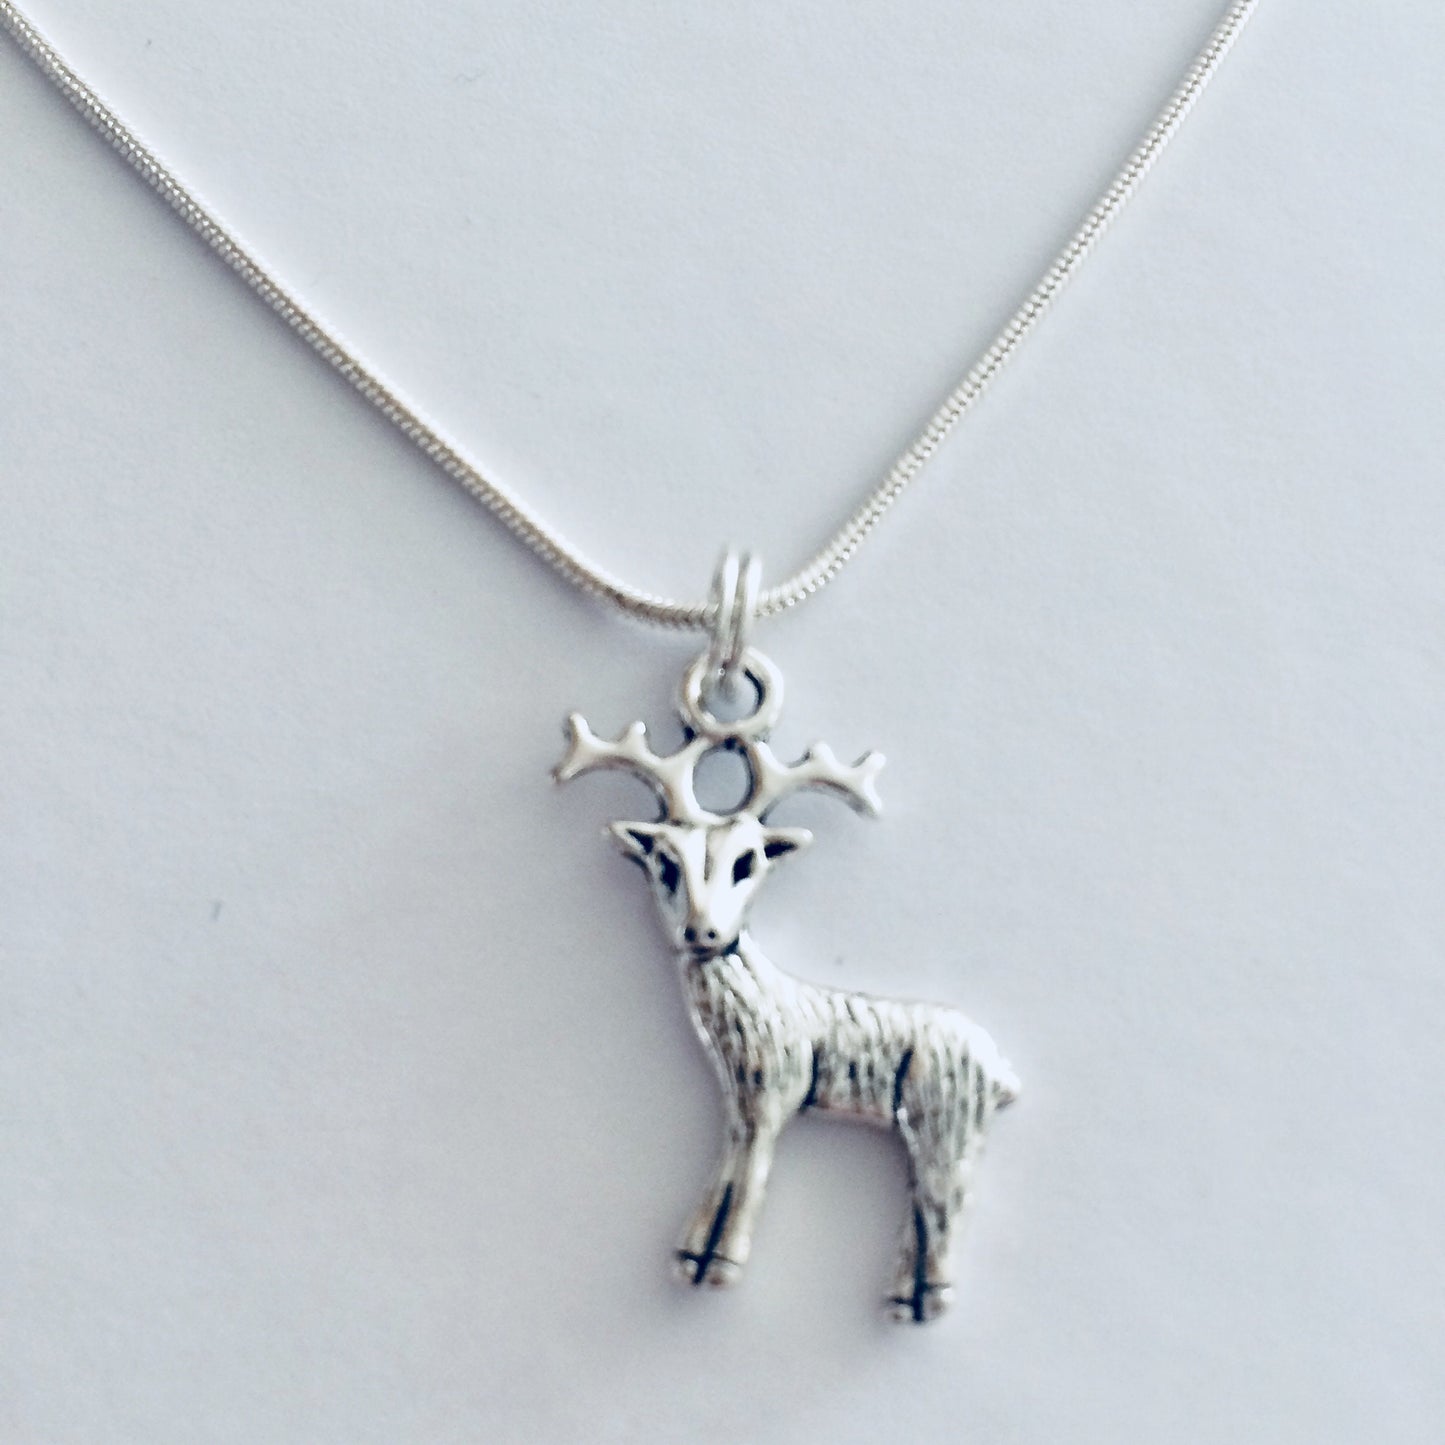 Stag Necklace, Deer Necklace, Woodland Necklace, Deer Charm, Buck Necklace, Gift For Her, Forest Jewellery, Forest Jewelry, Stag Charm.